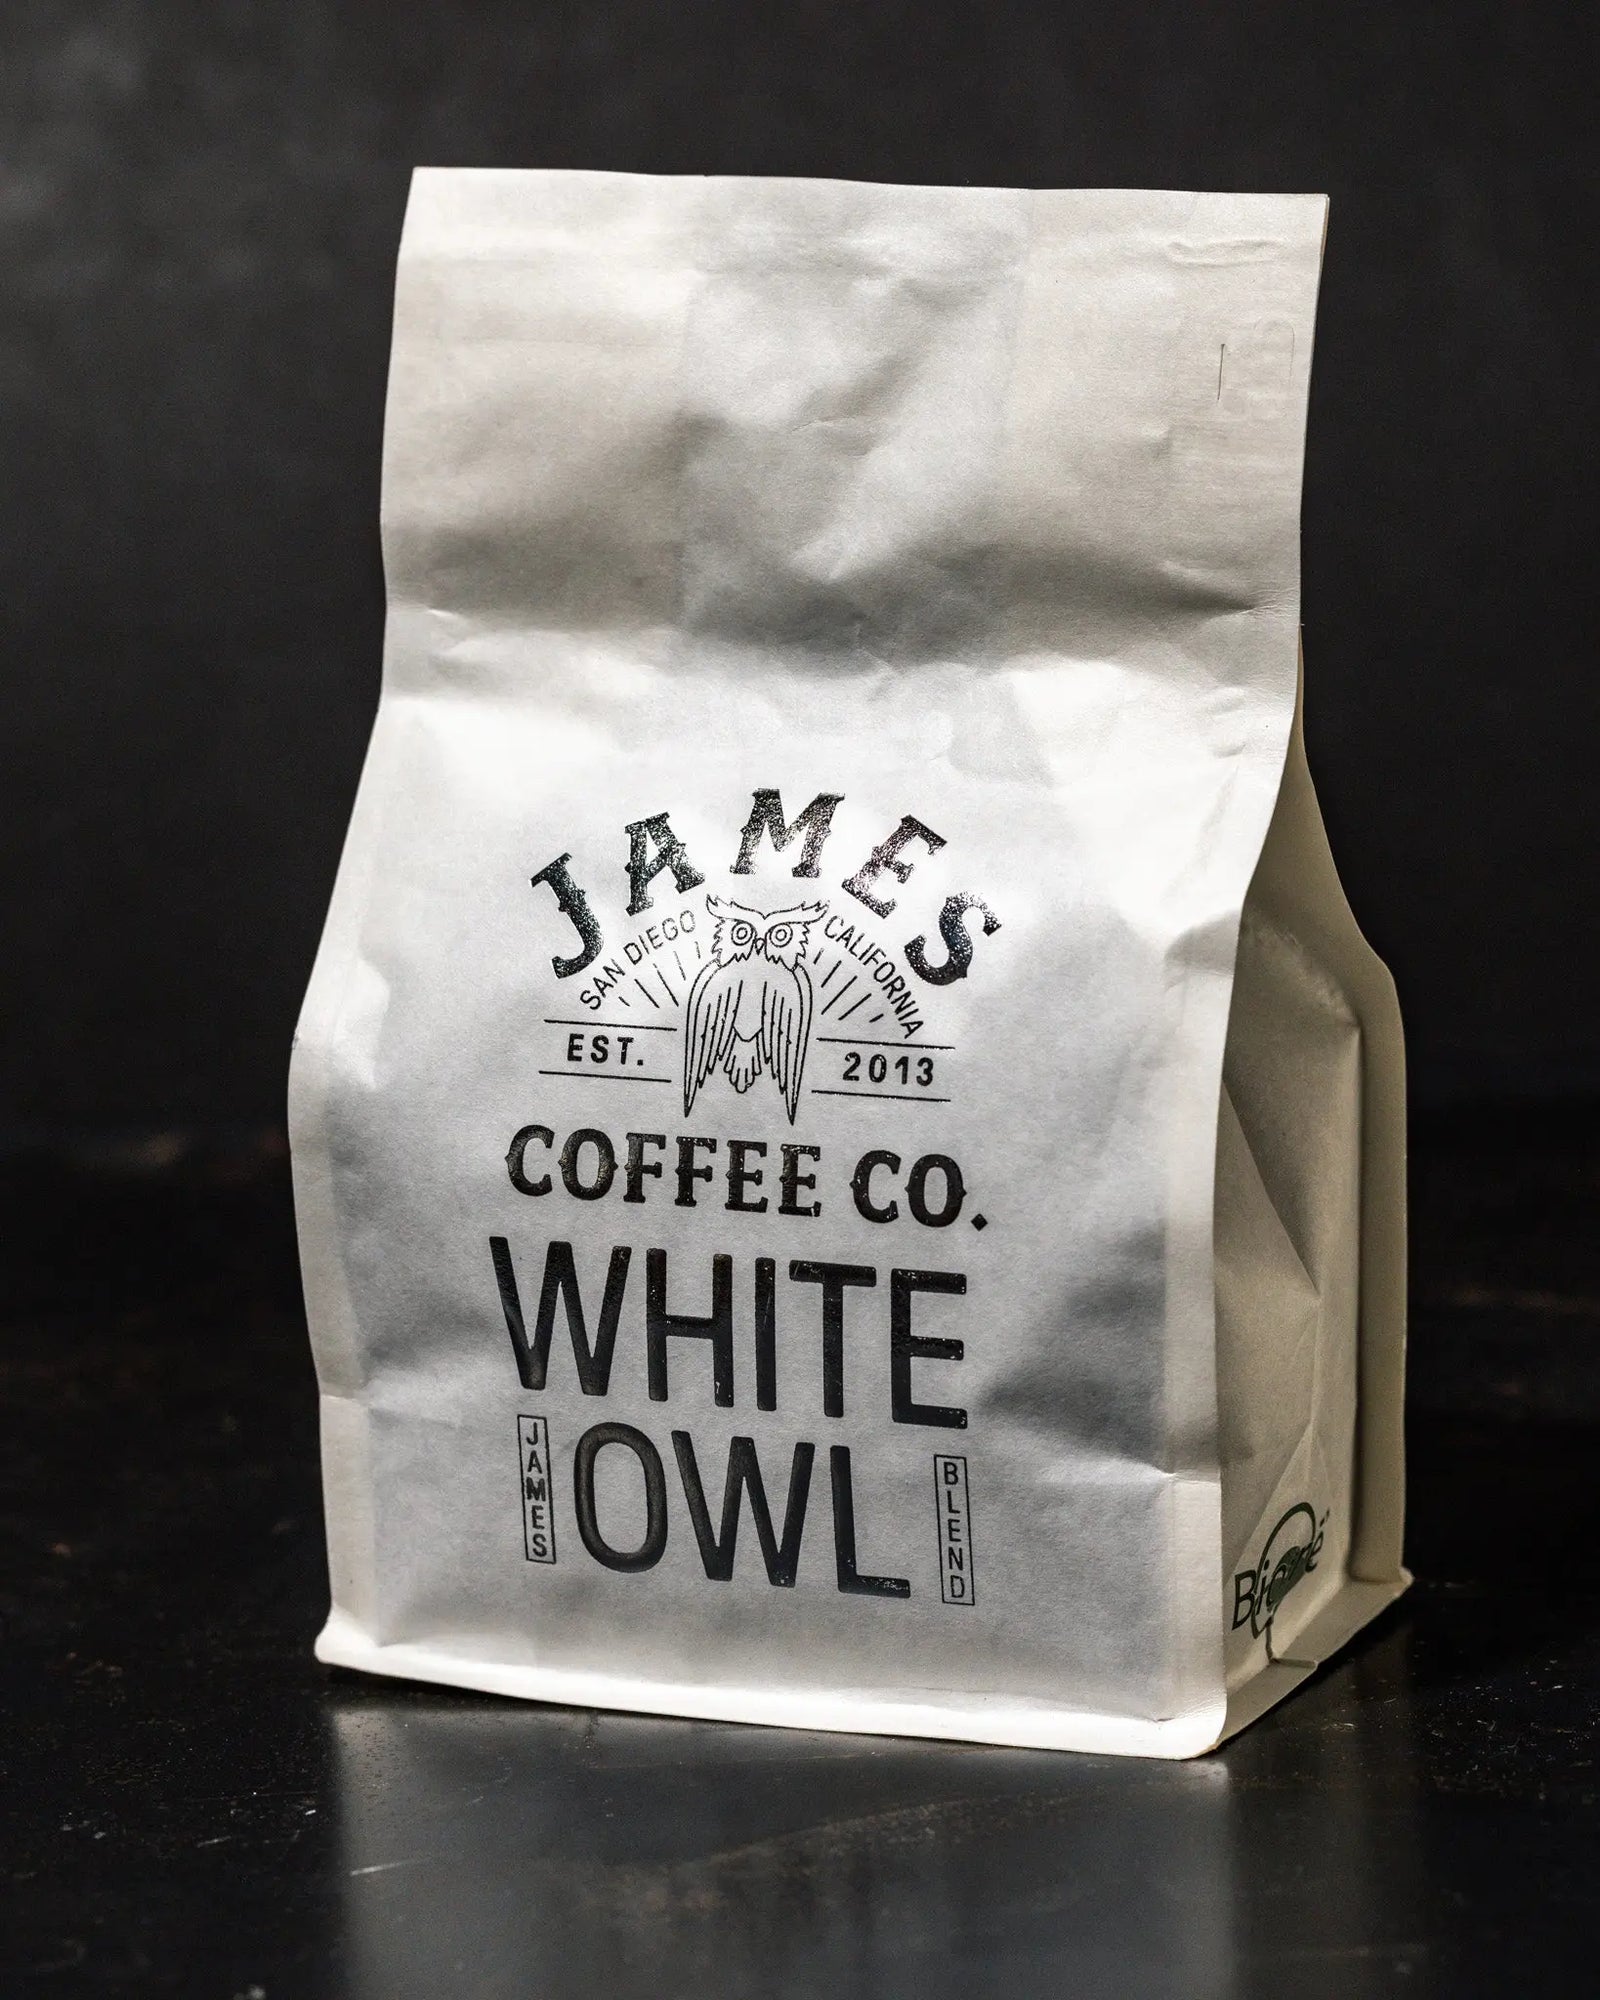 Cold Brew Kit - James Coffee Co.